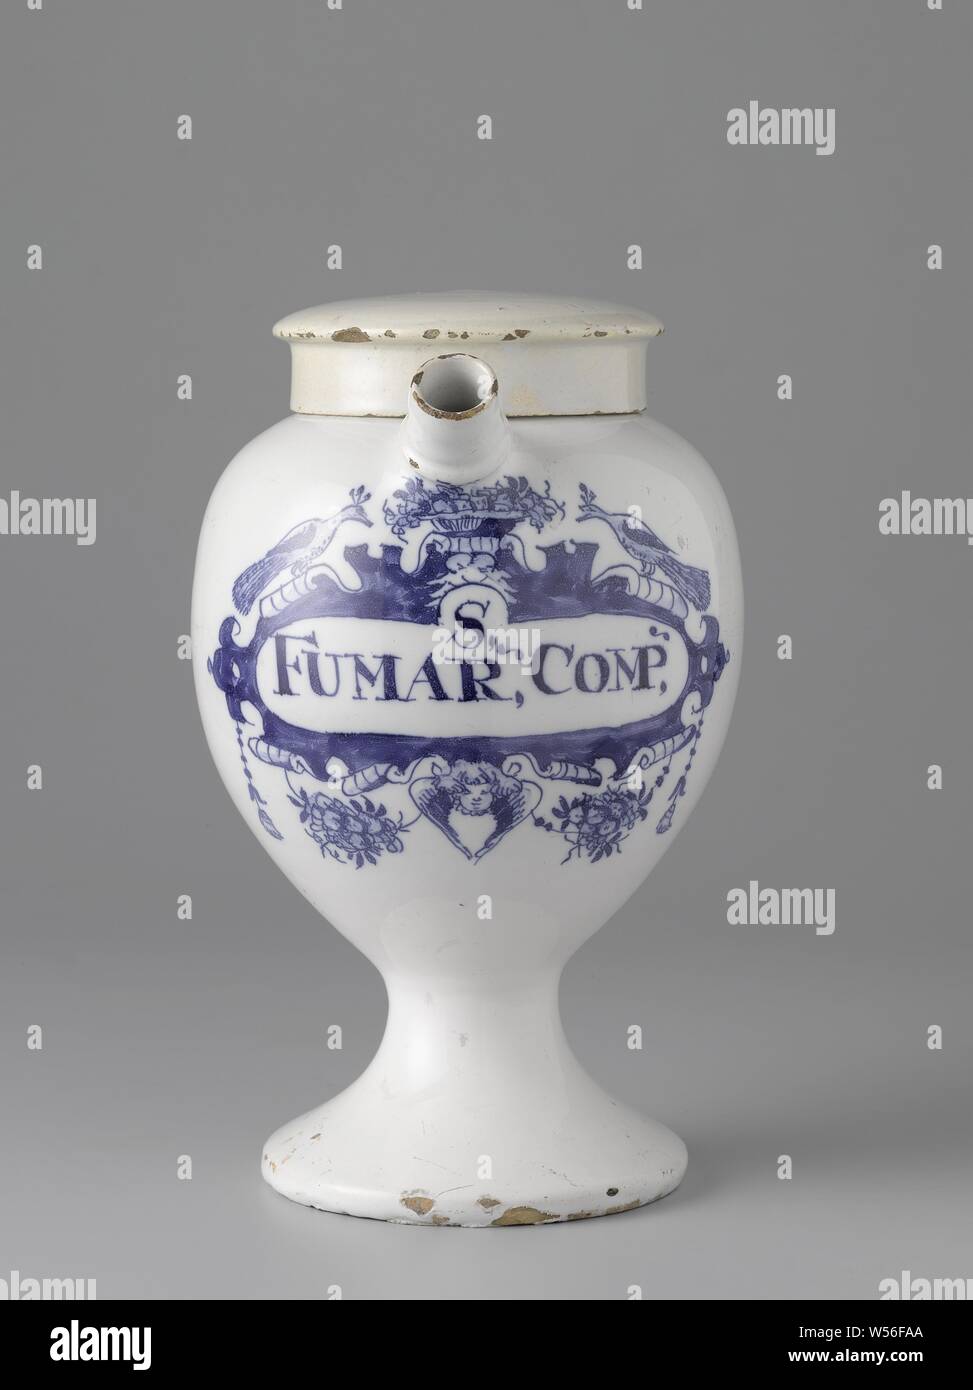 Pharmacy jar with inscription S, / FUMAR, COMP, Pharmacy jar of faience. With ear and spout and blue painted label with inscription: S, COMP, ., anonymous (mentioned on object), Delft, c. 1750 - c. 1800, h 22 cm × w 19 cm d 14.5 cm Stock Photo